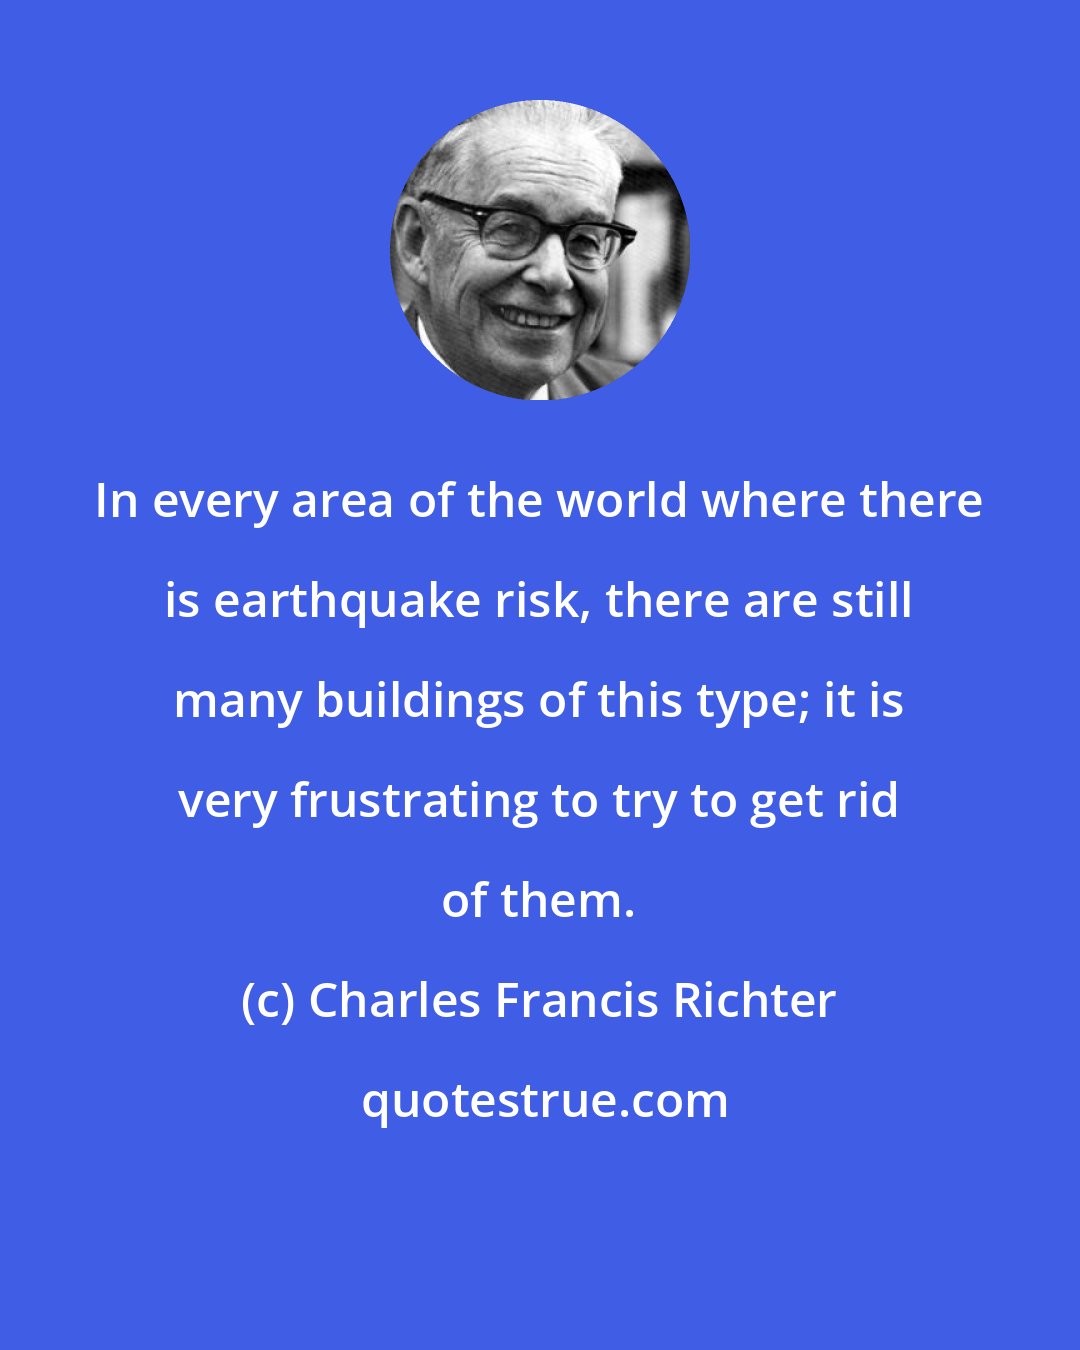 Charles Francis Richter: In every area of the world where there is earthquake risk, there are still many buildings of this type; it is very frustrating to try to get rid of them.